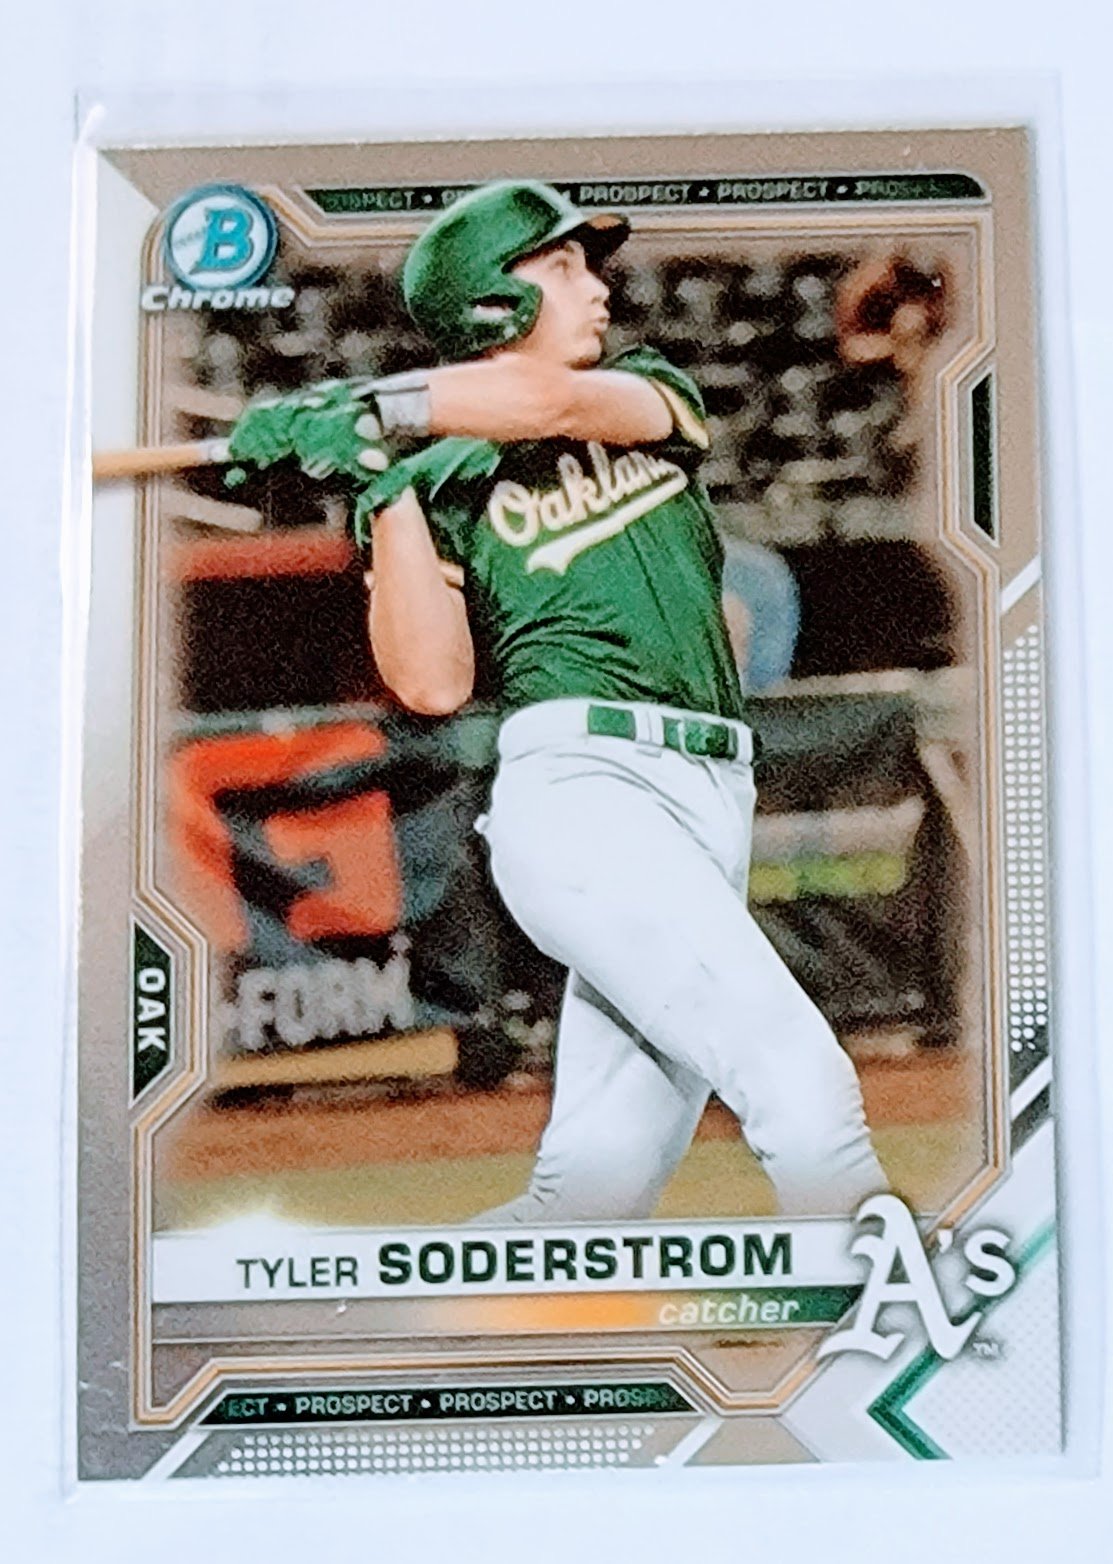 2021 Bowman Chrome Tyler Soderstrom Prospects Baseball Trading Card SMCB1 simple Xclusive Collectibles   